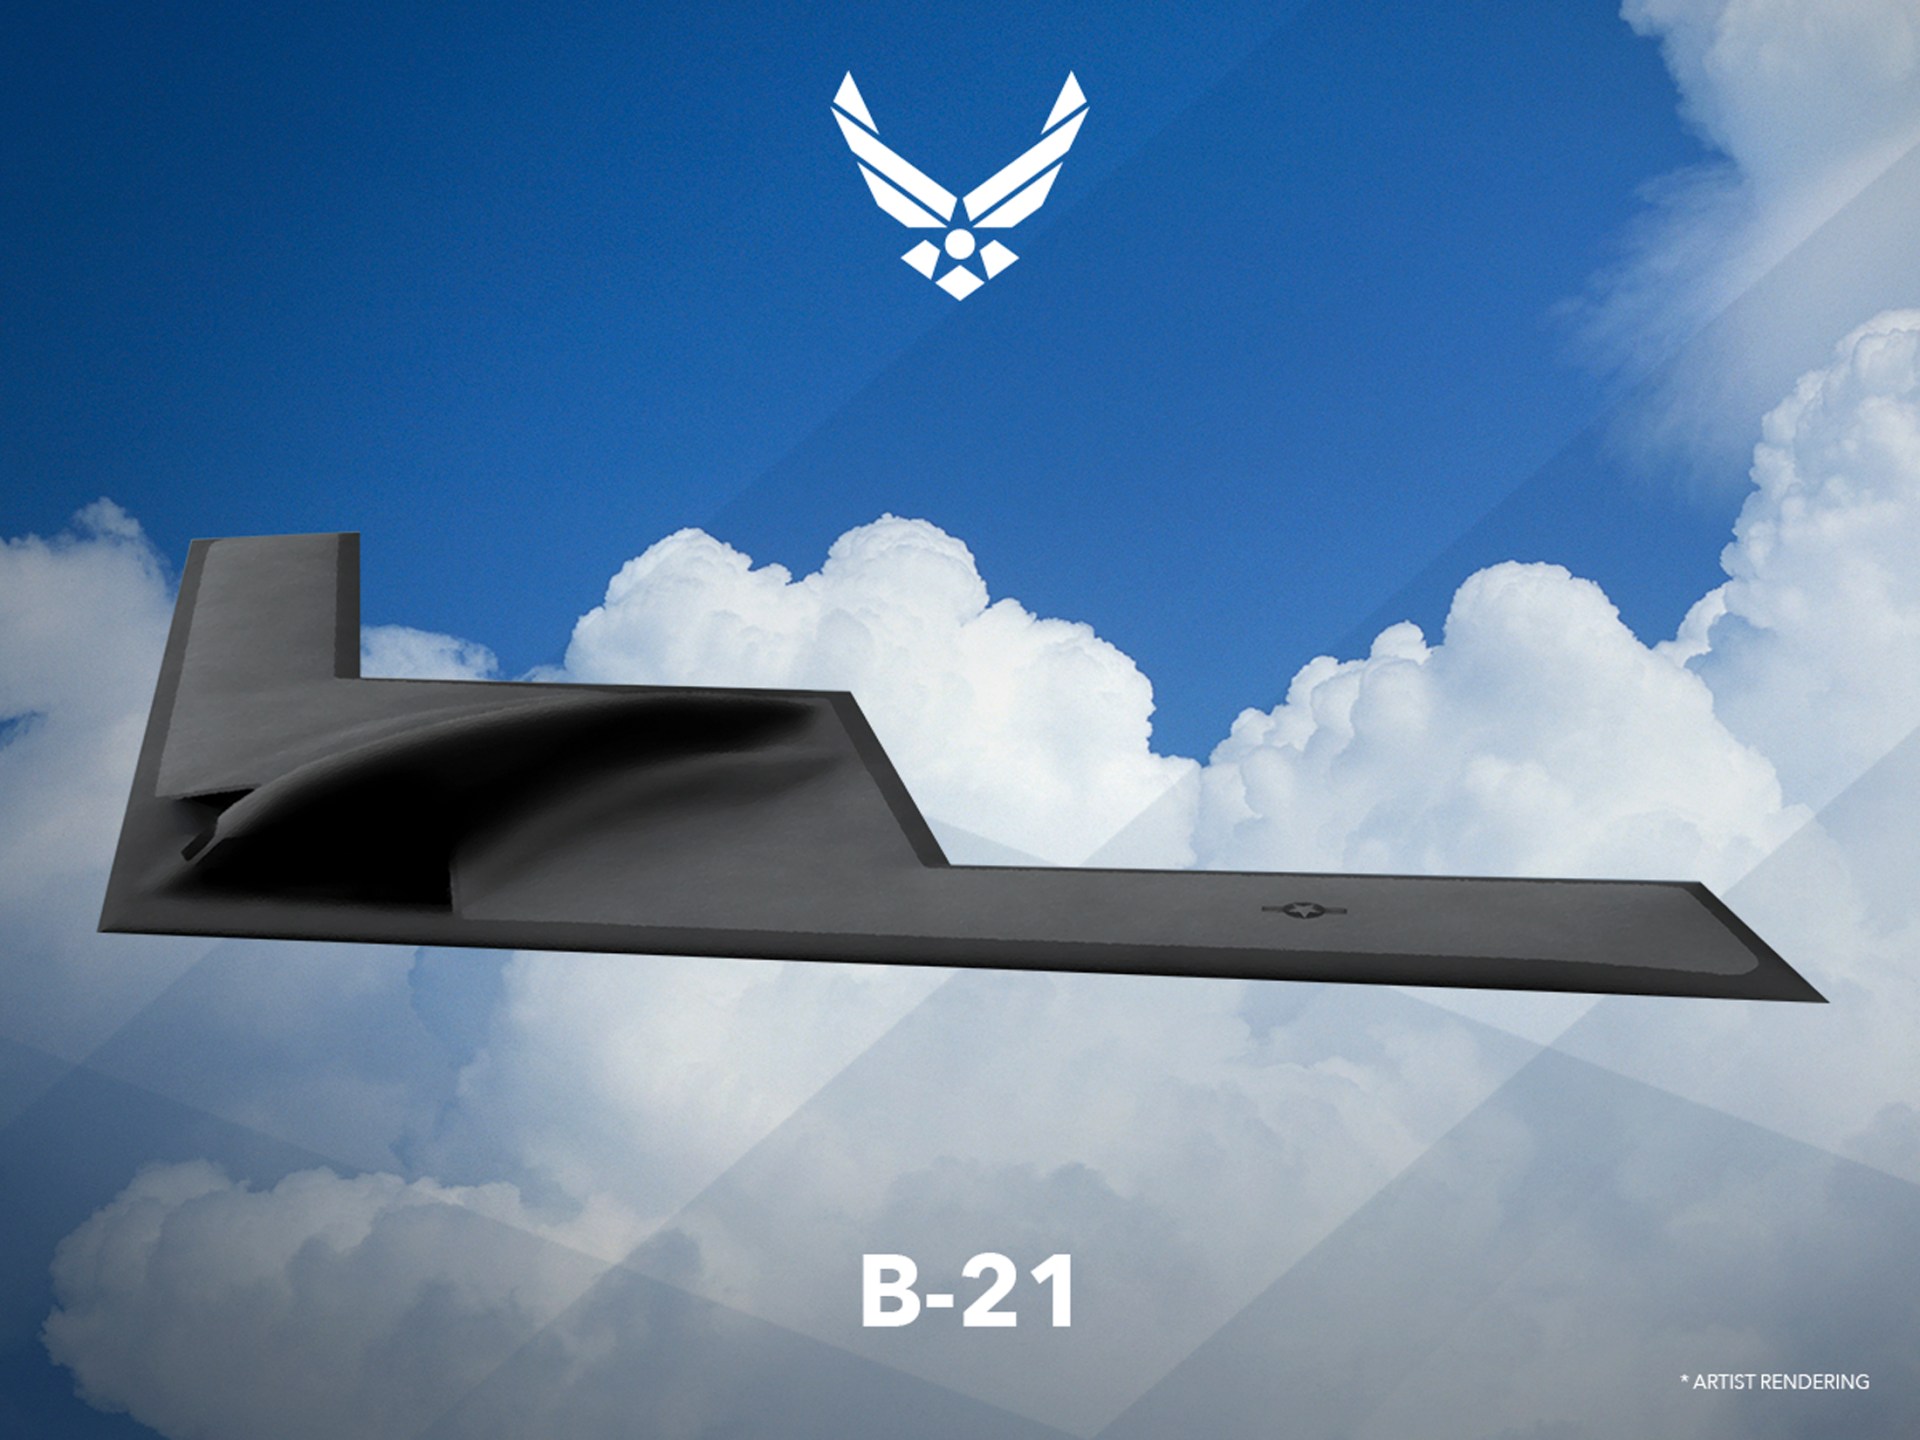 What we know about the new US B-21 Raider Stealth bomber